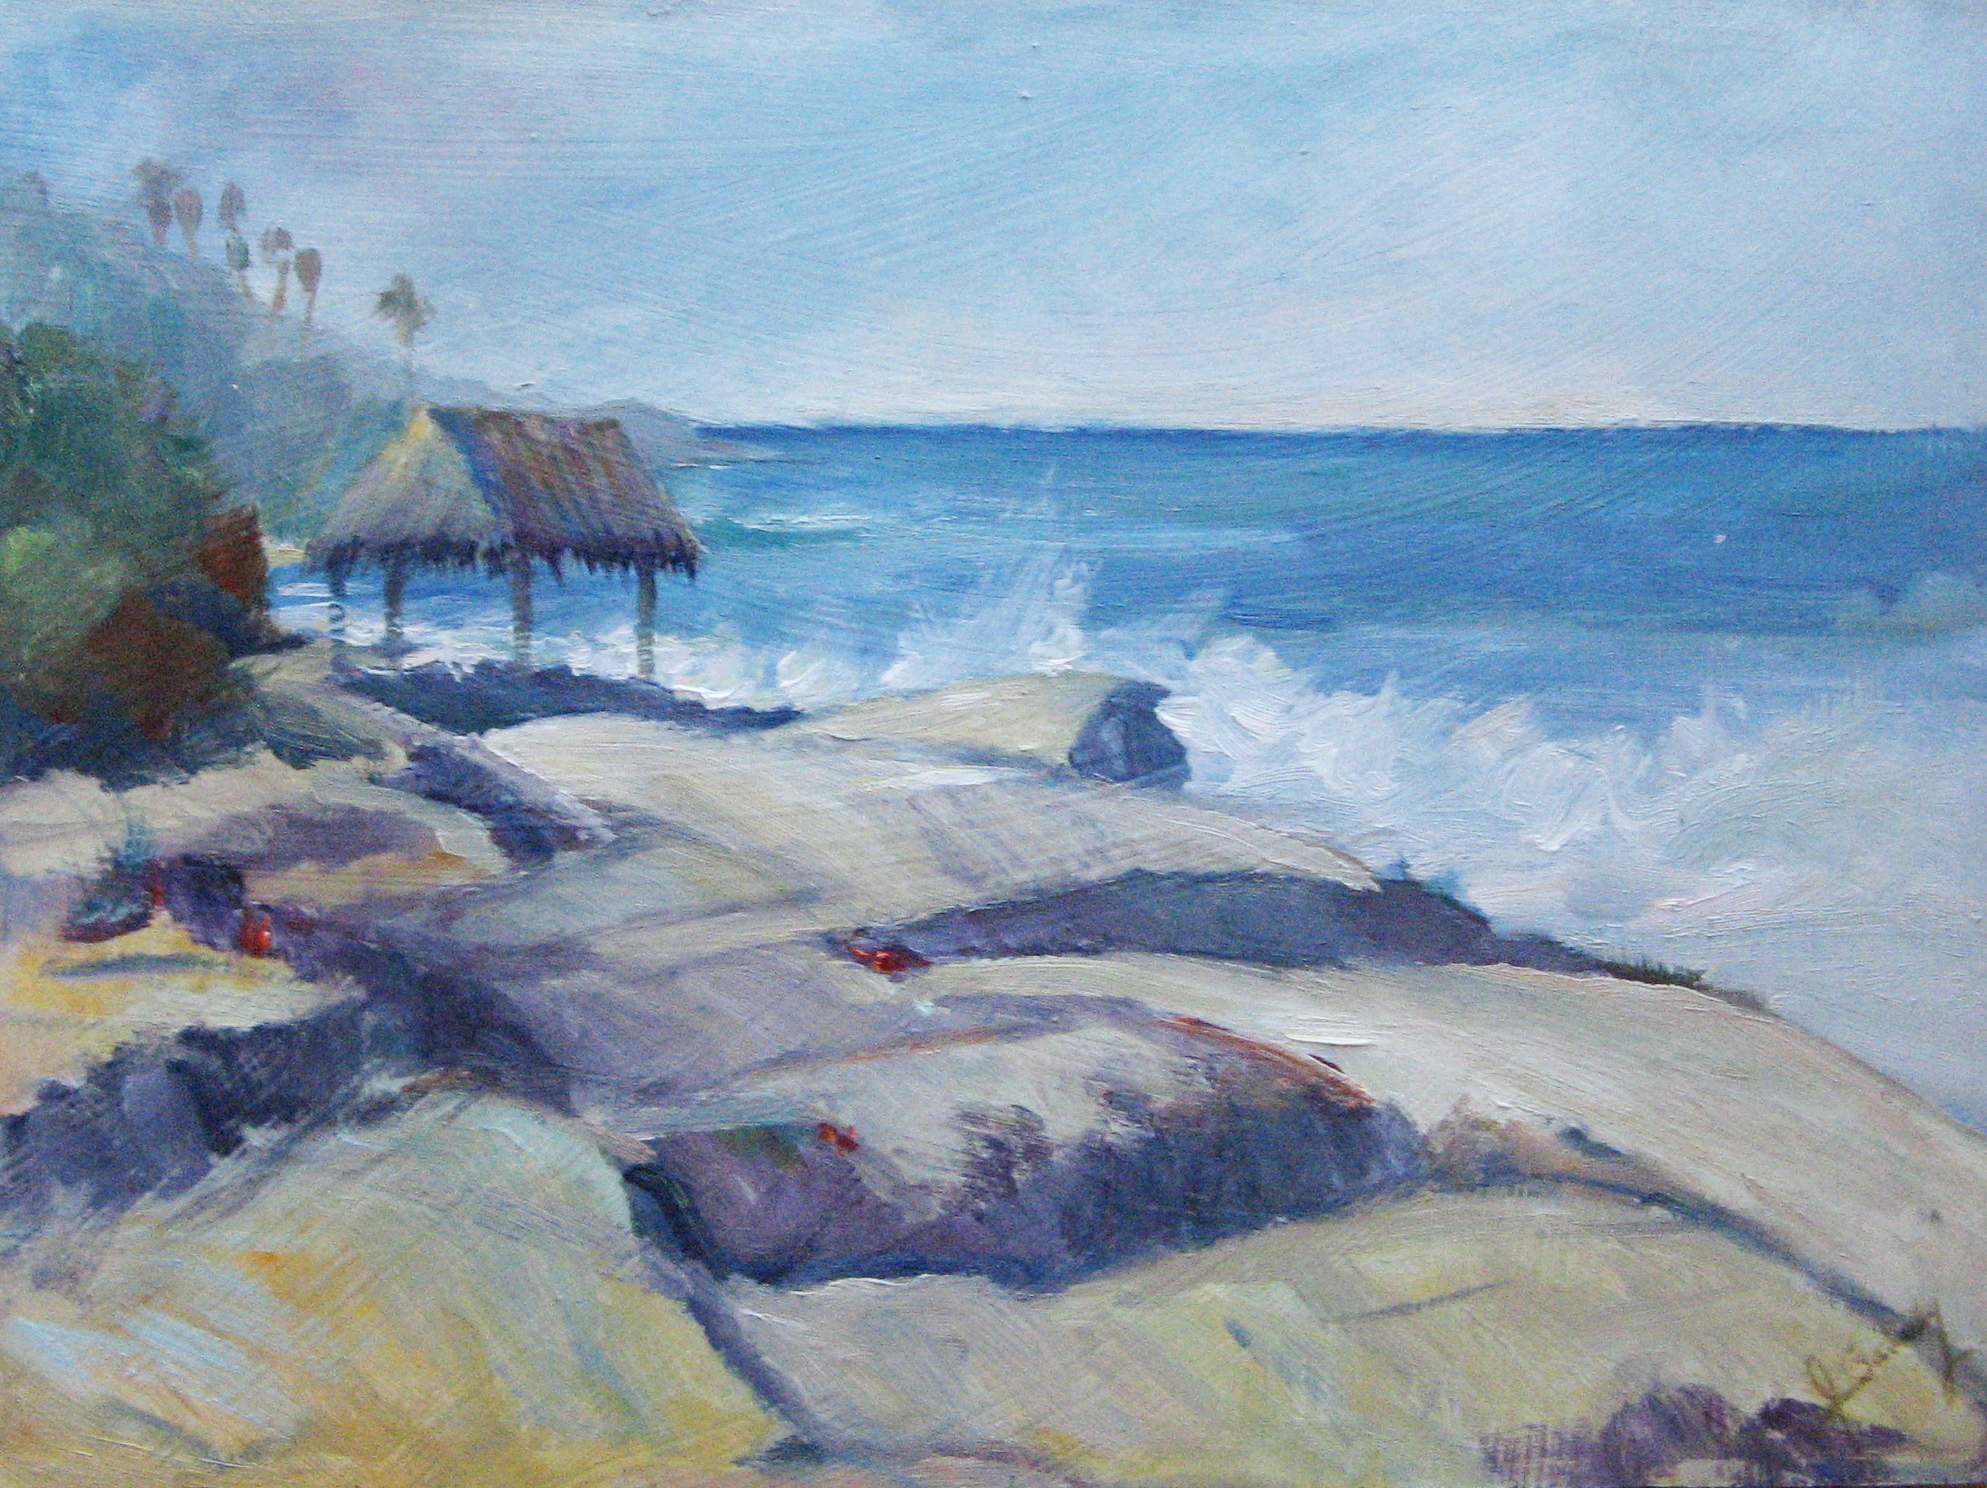 Wind and Sea, a painting by artist Judy Salinsky